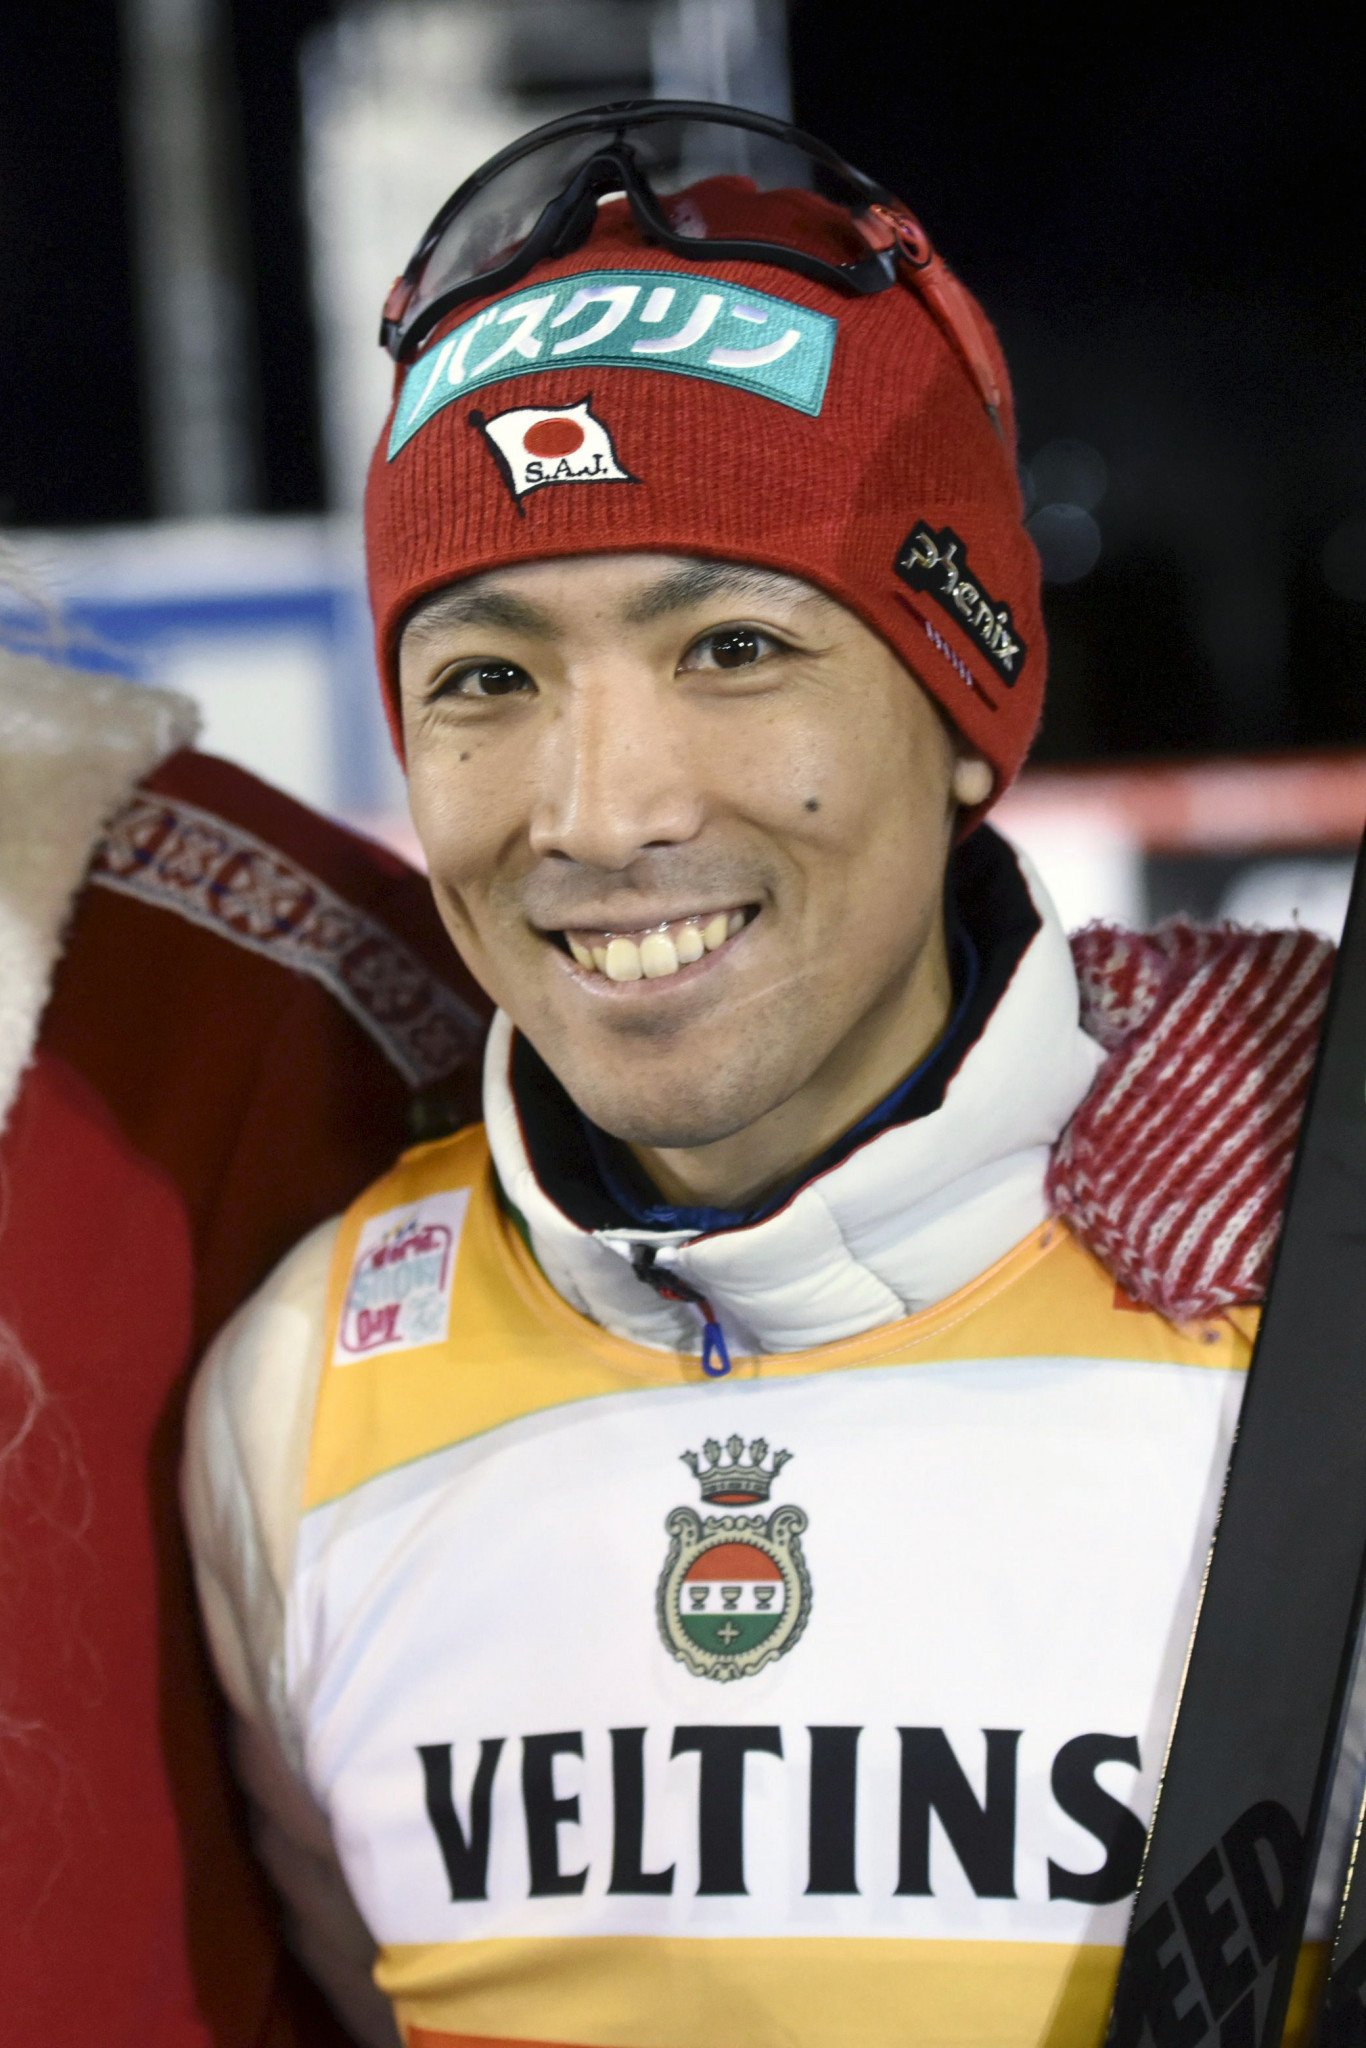 Akito Watabe was a silver medalist at the 2014 Winter Olympics in Sochi ©Getty Images